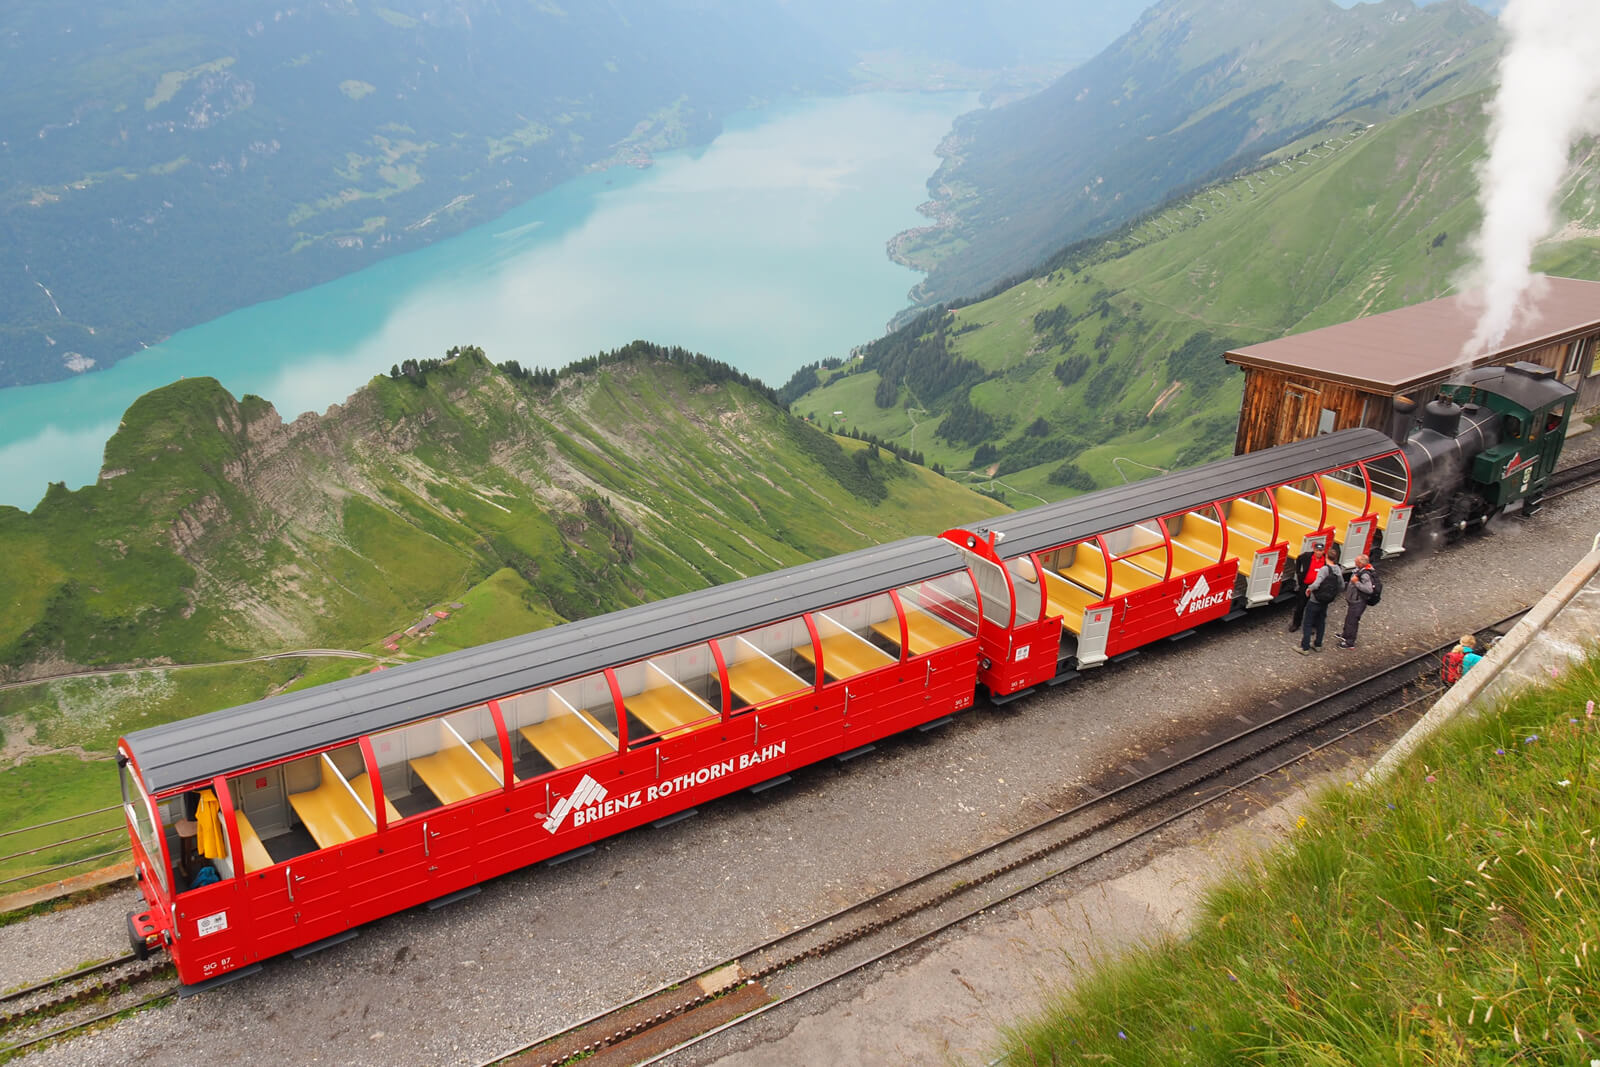 Swiss Travel Pass Overview and Insights for 2024